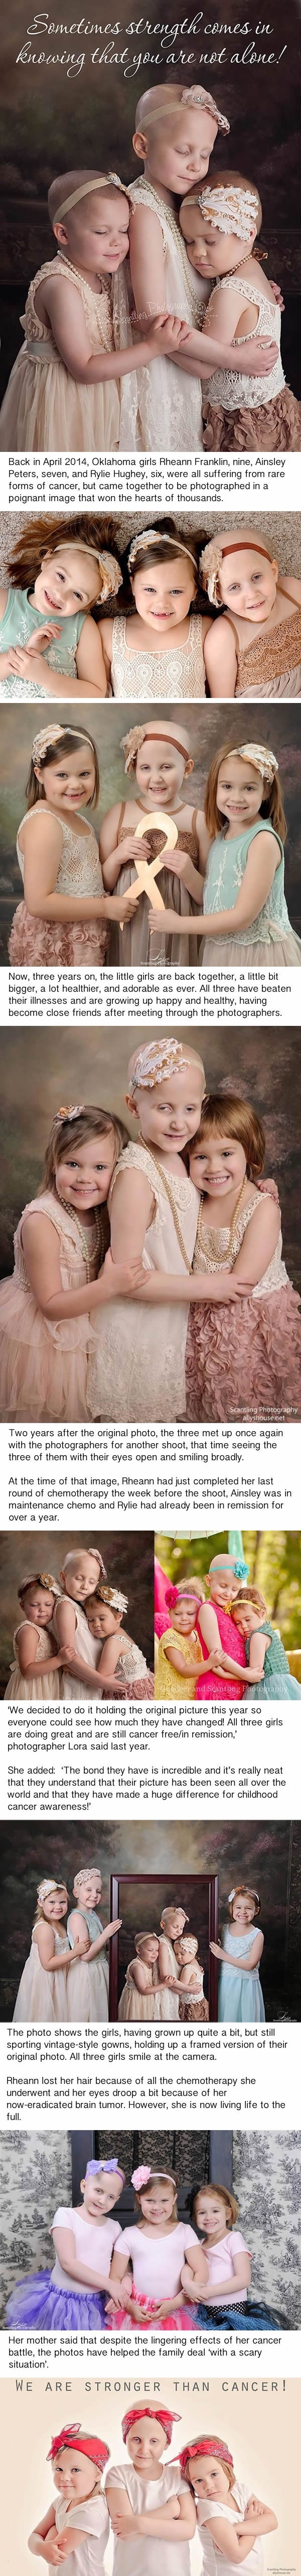 Young cancer sufferers reunite to recreate viral portrait